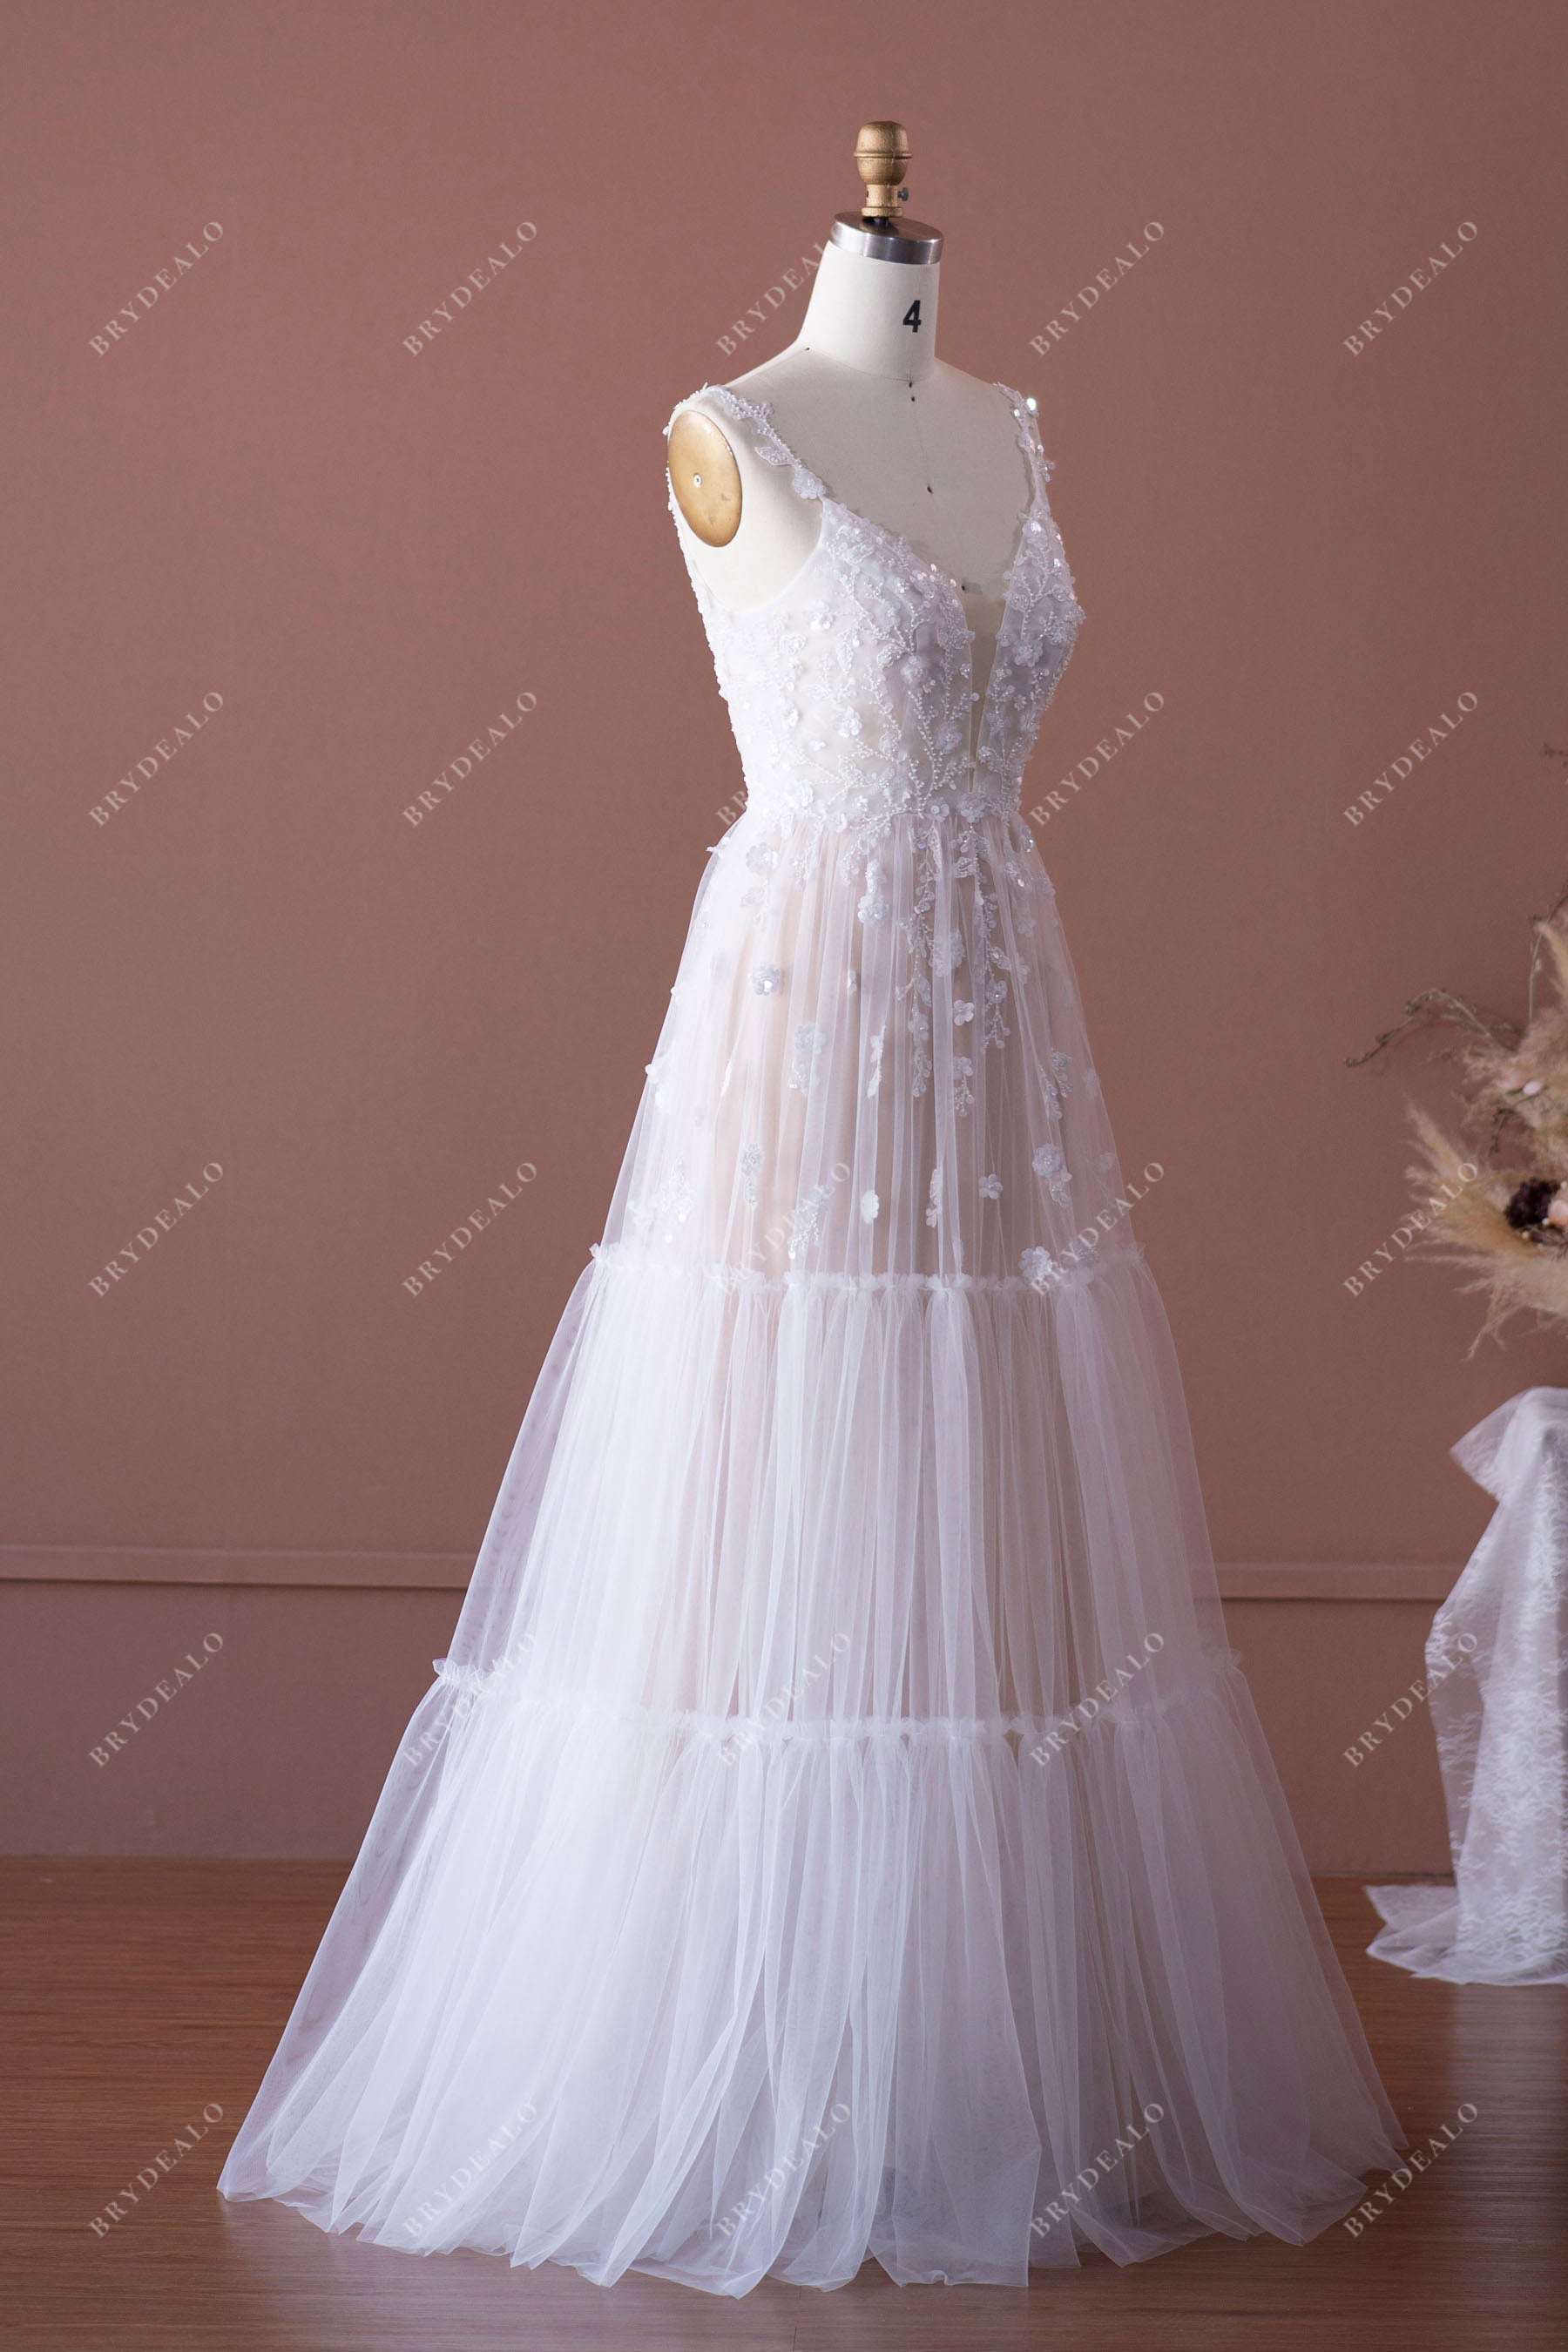 Flower Lace Tiered A-line Wedding Dress